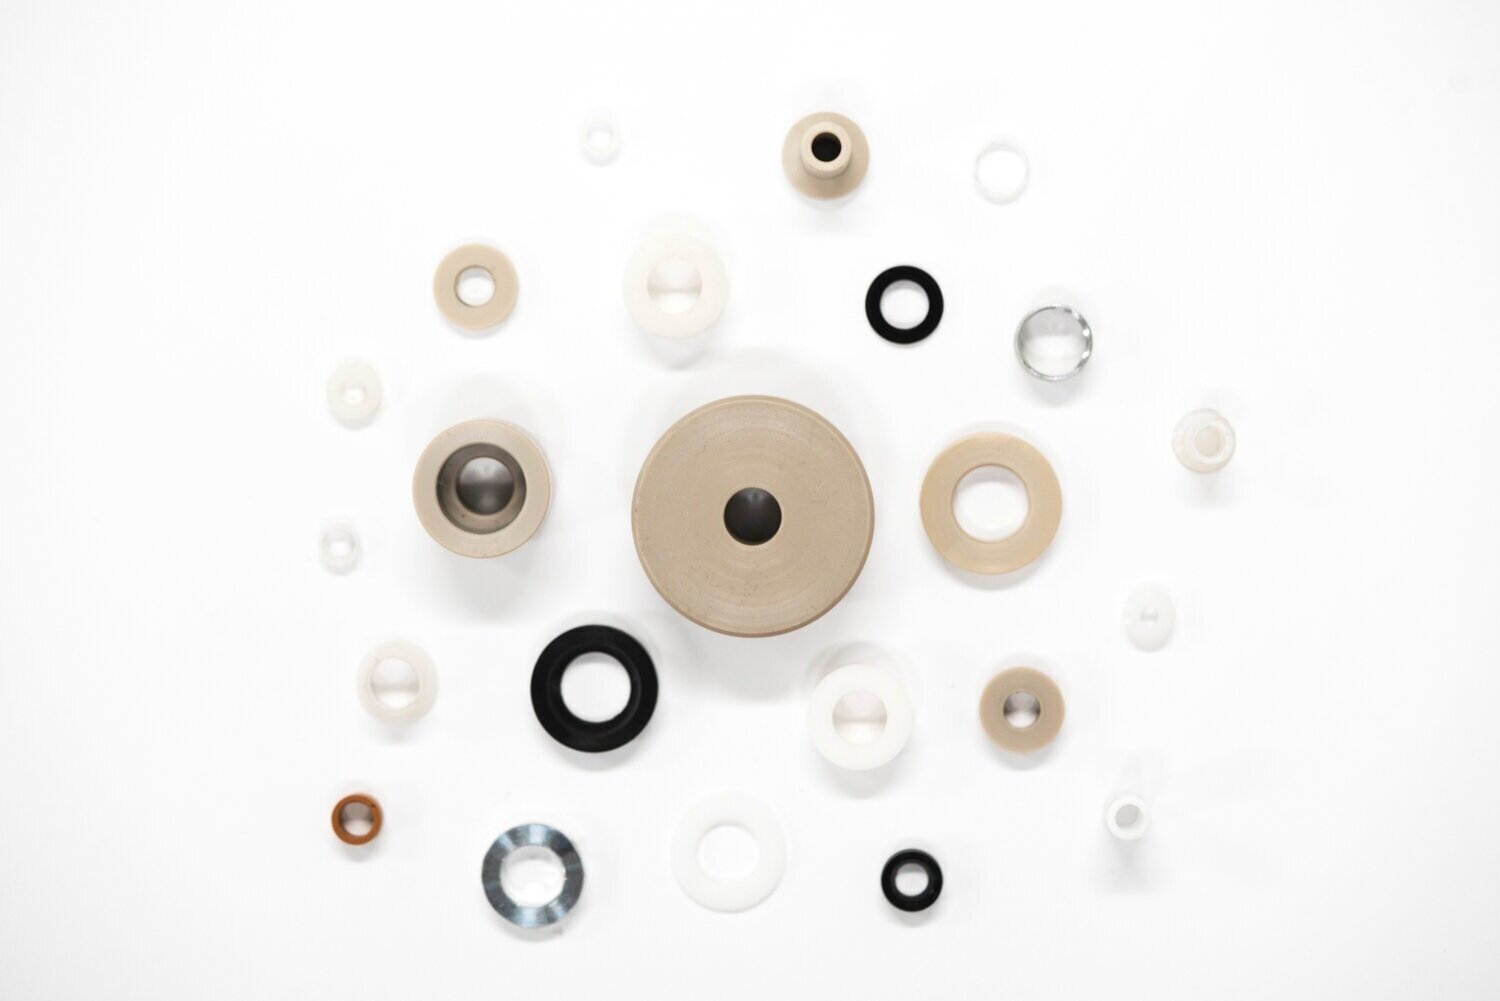 Commonly machined plastic components